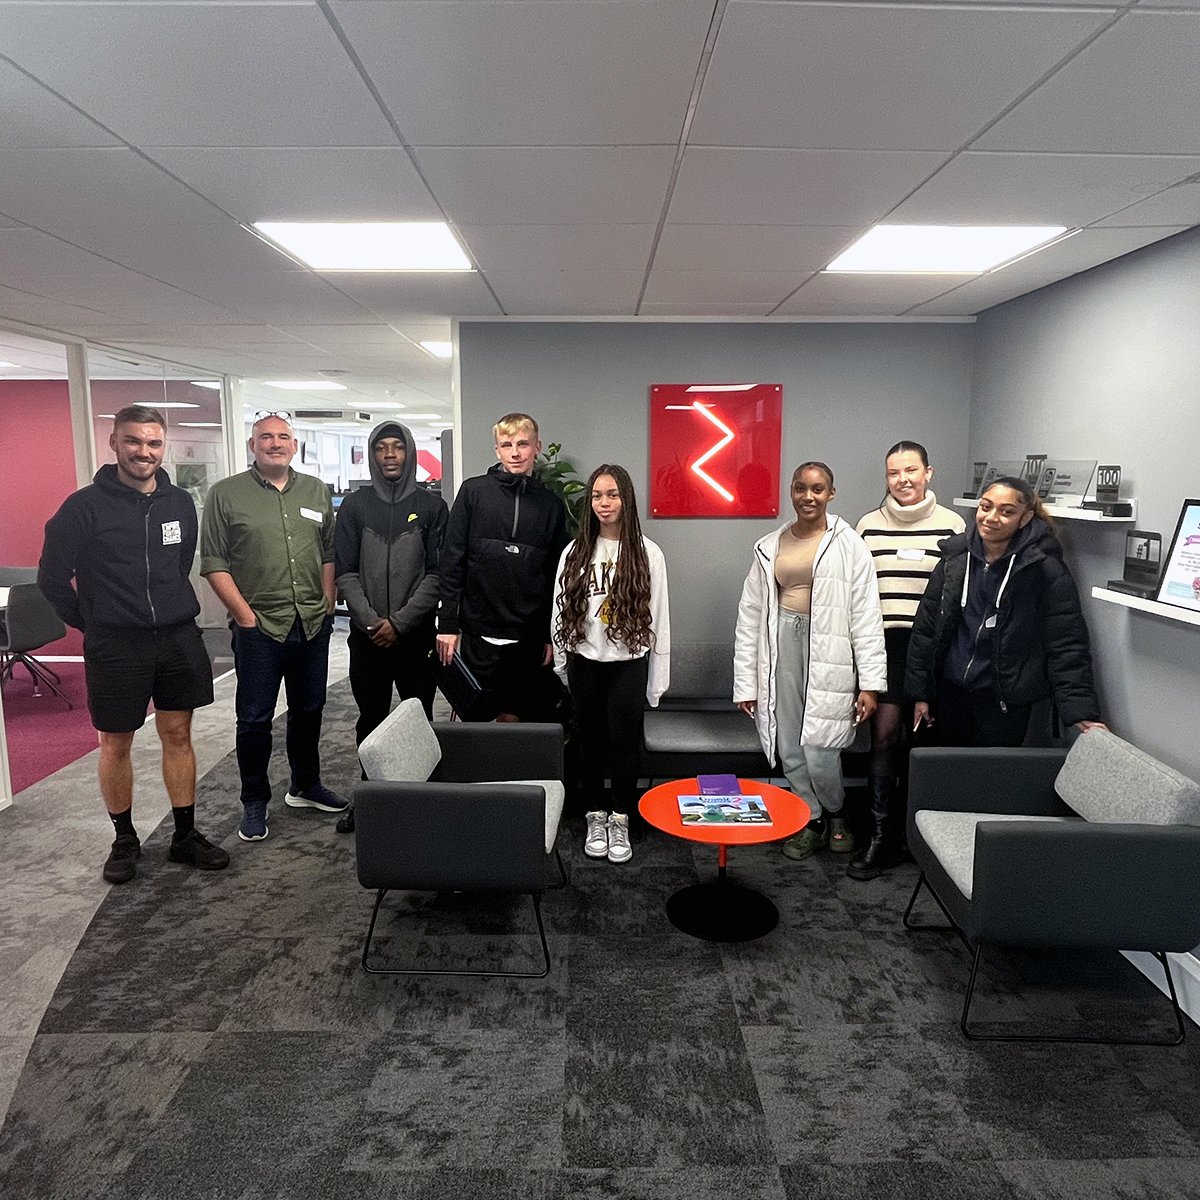 It was great to welcome @EmpireFightingC for Employability Skills Training vol.2. We wish the young people good luck on their career journeys!

#partnership #charity #careers #interview #interviewskills #cvbuilding #bristolyouth #youthsupport #redrock